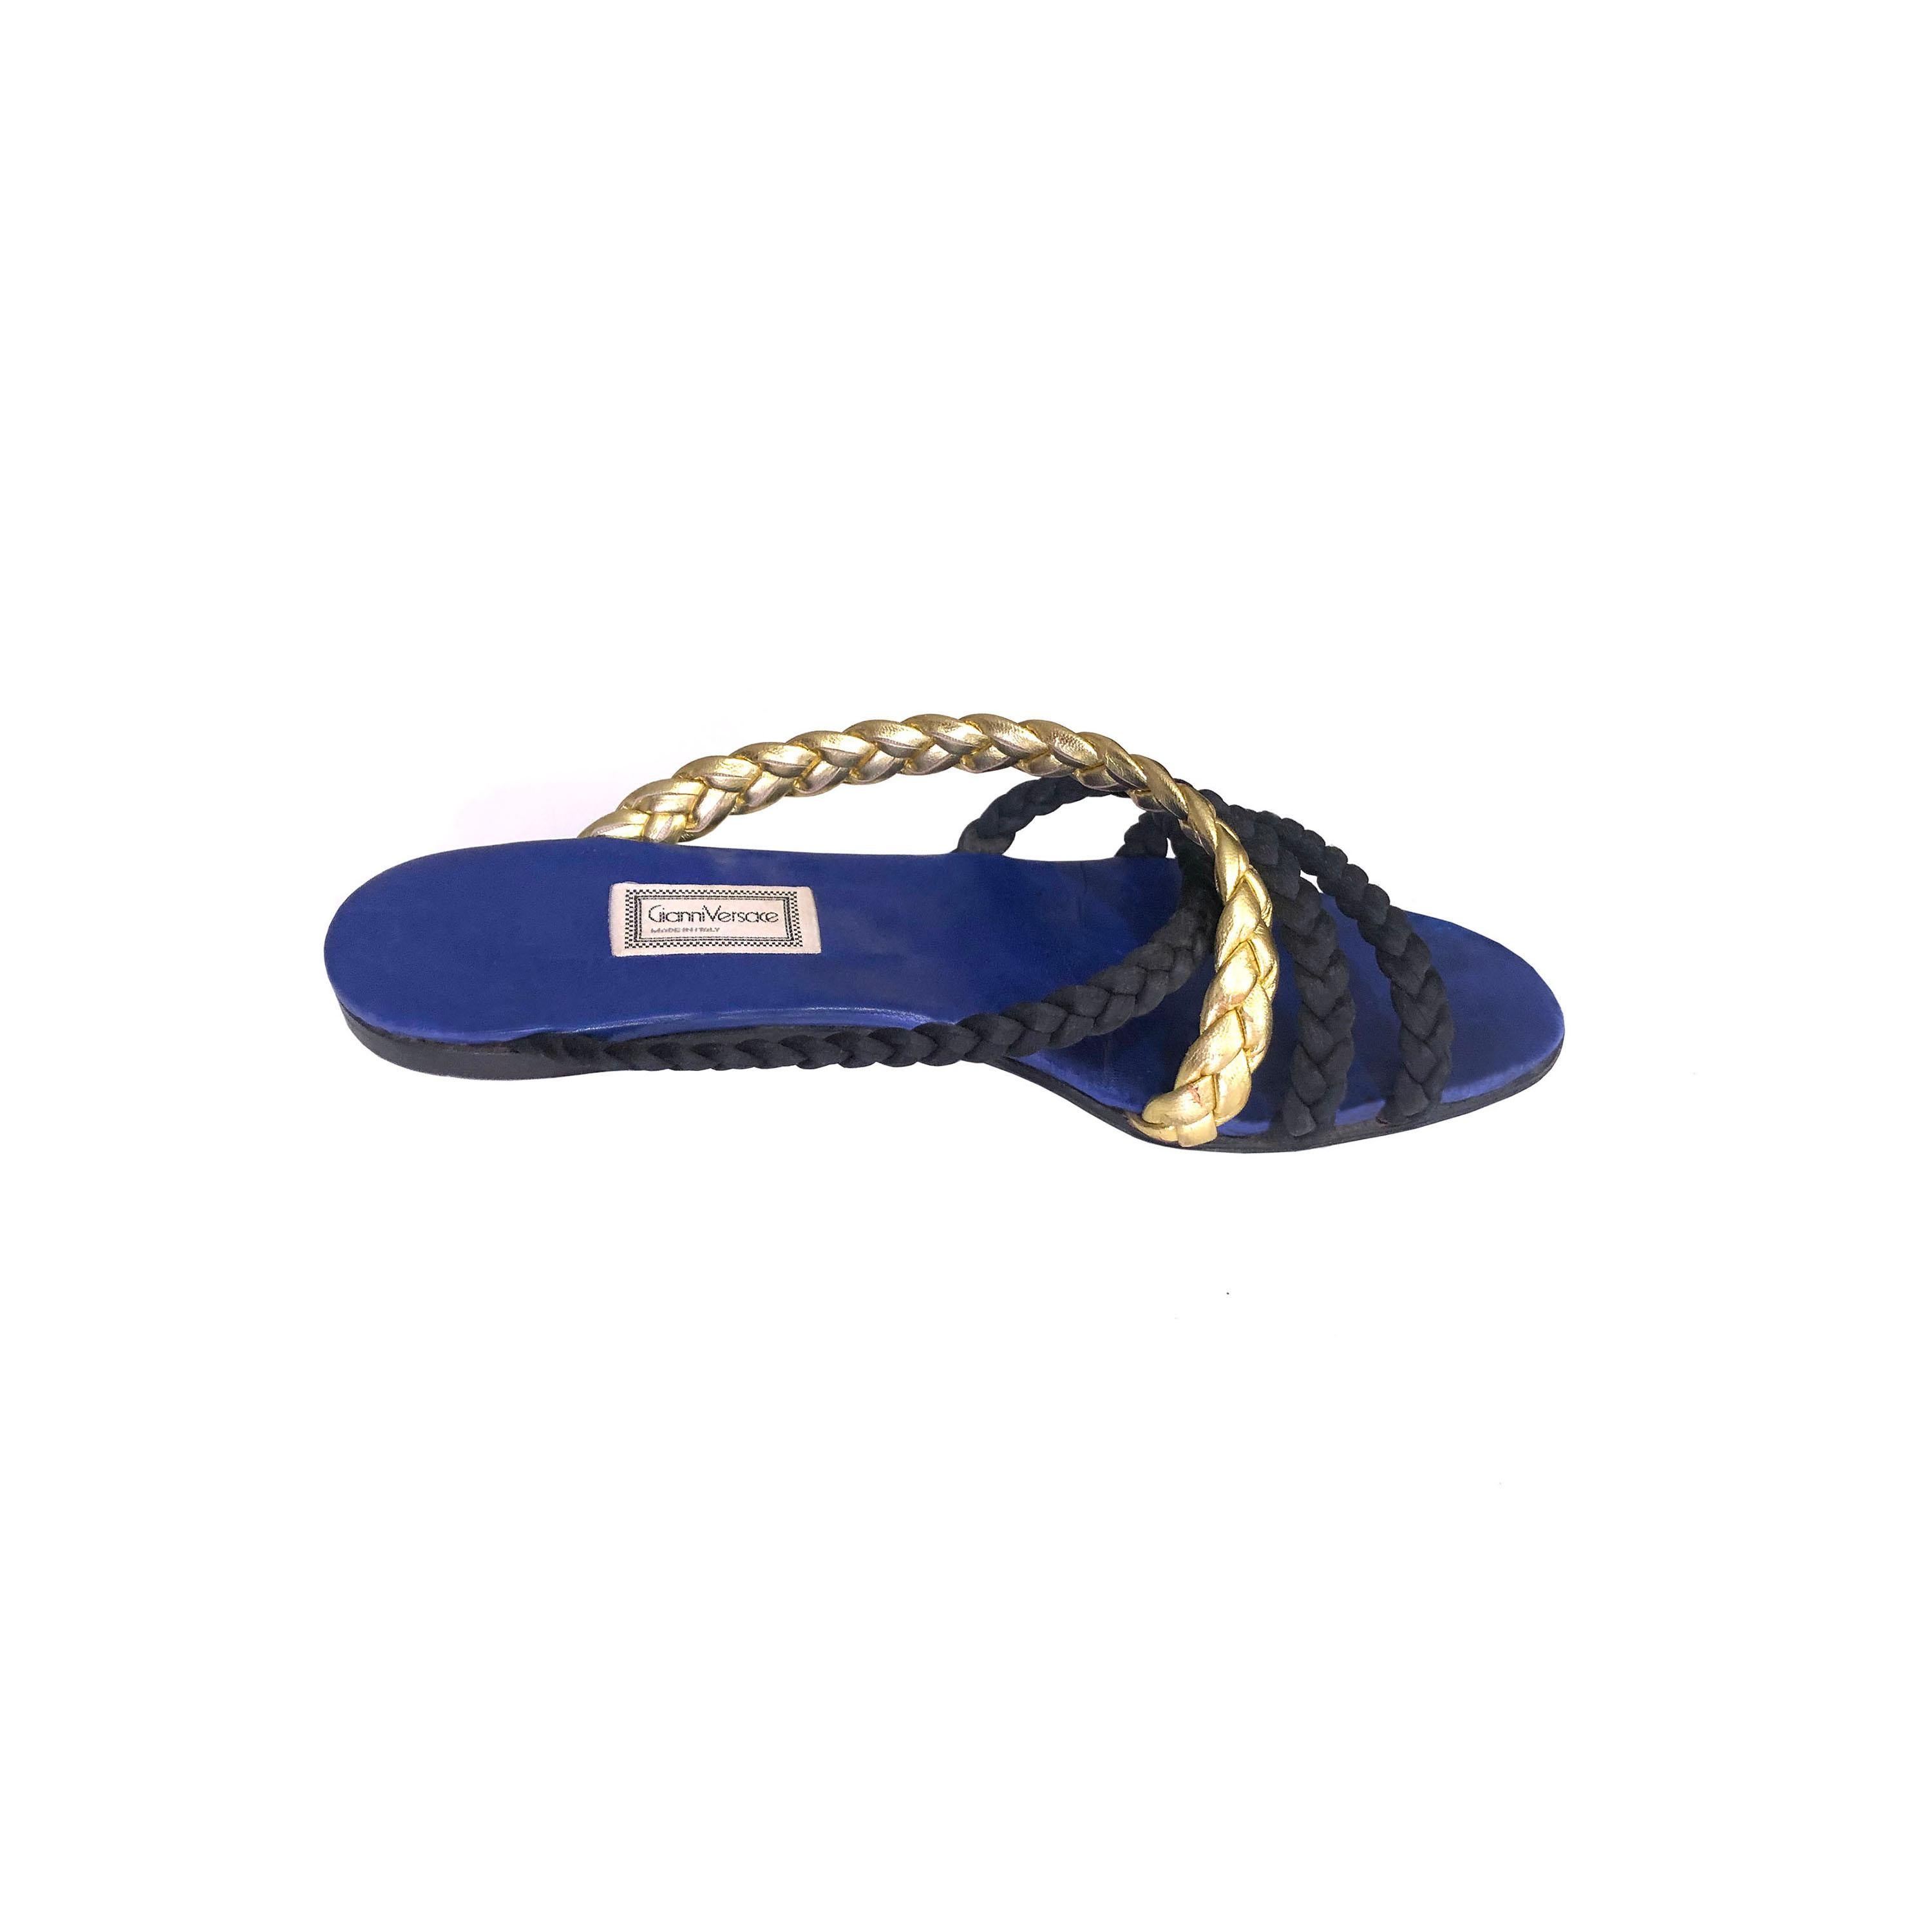 Product Details: Gianni Versace - 1980s Vintage - Sandals - Gold Leather + Black Cord Plaited Front Strap Detailing - Electric Blue Leather Soles - Made in Italy 
Era: 1980s Vintage
Label: Gianni Versace
Size: EU 37.5
Fabric Content: Leather +